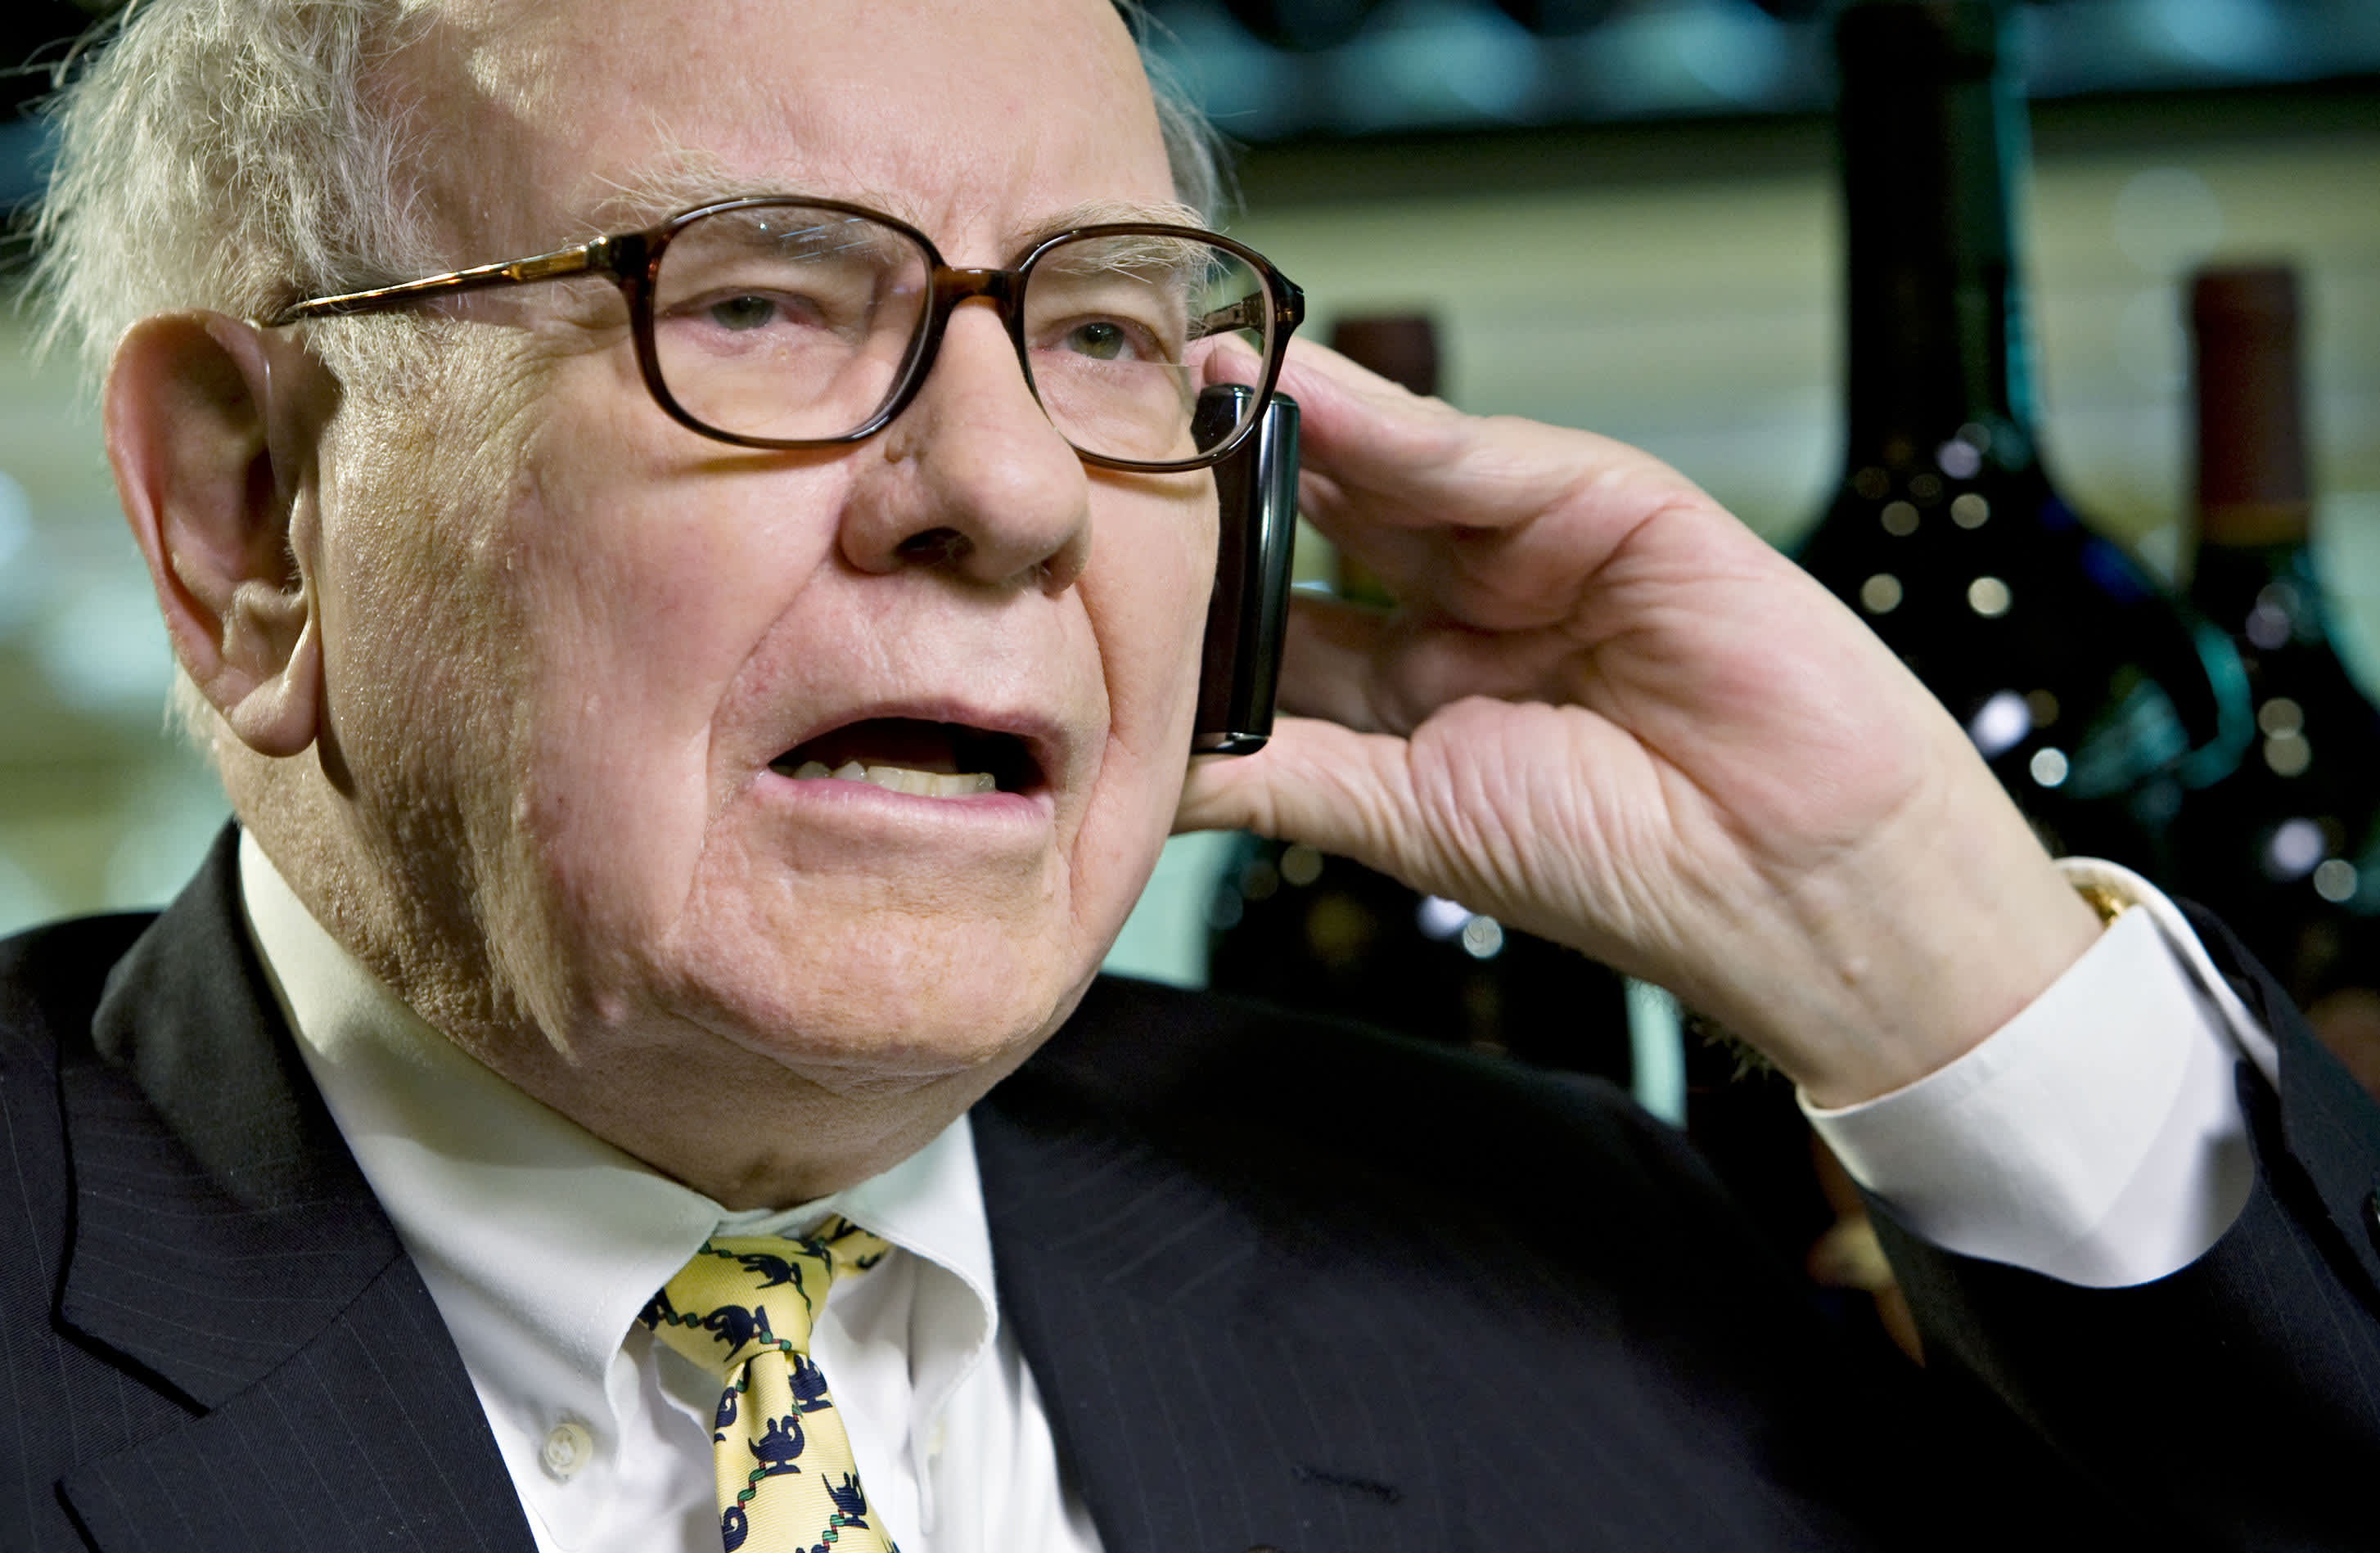 How Warren Buffett helped save the economy during the financial crisis